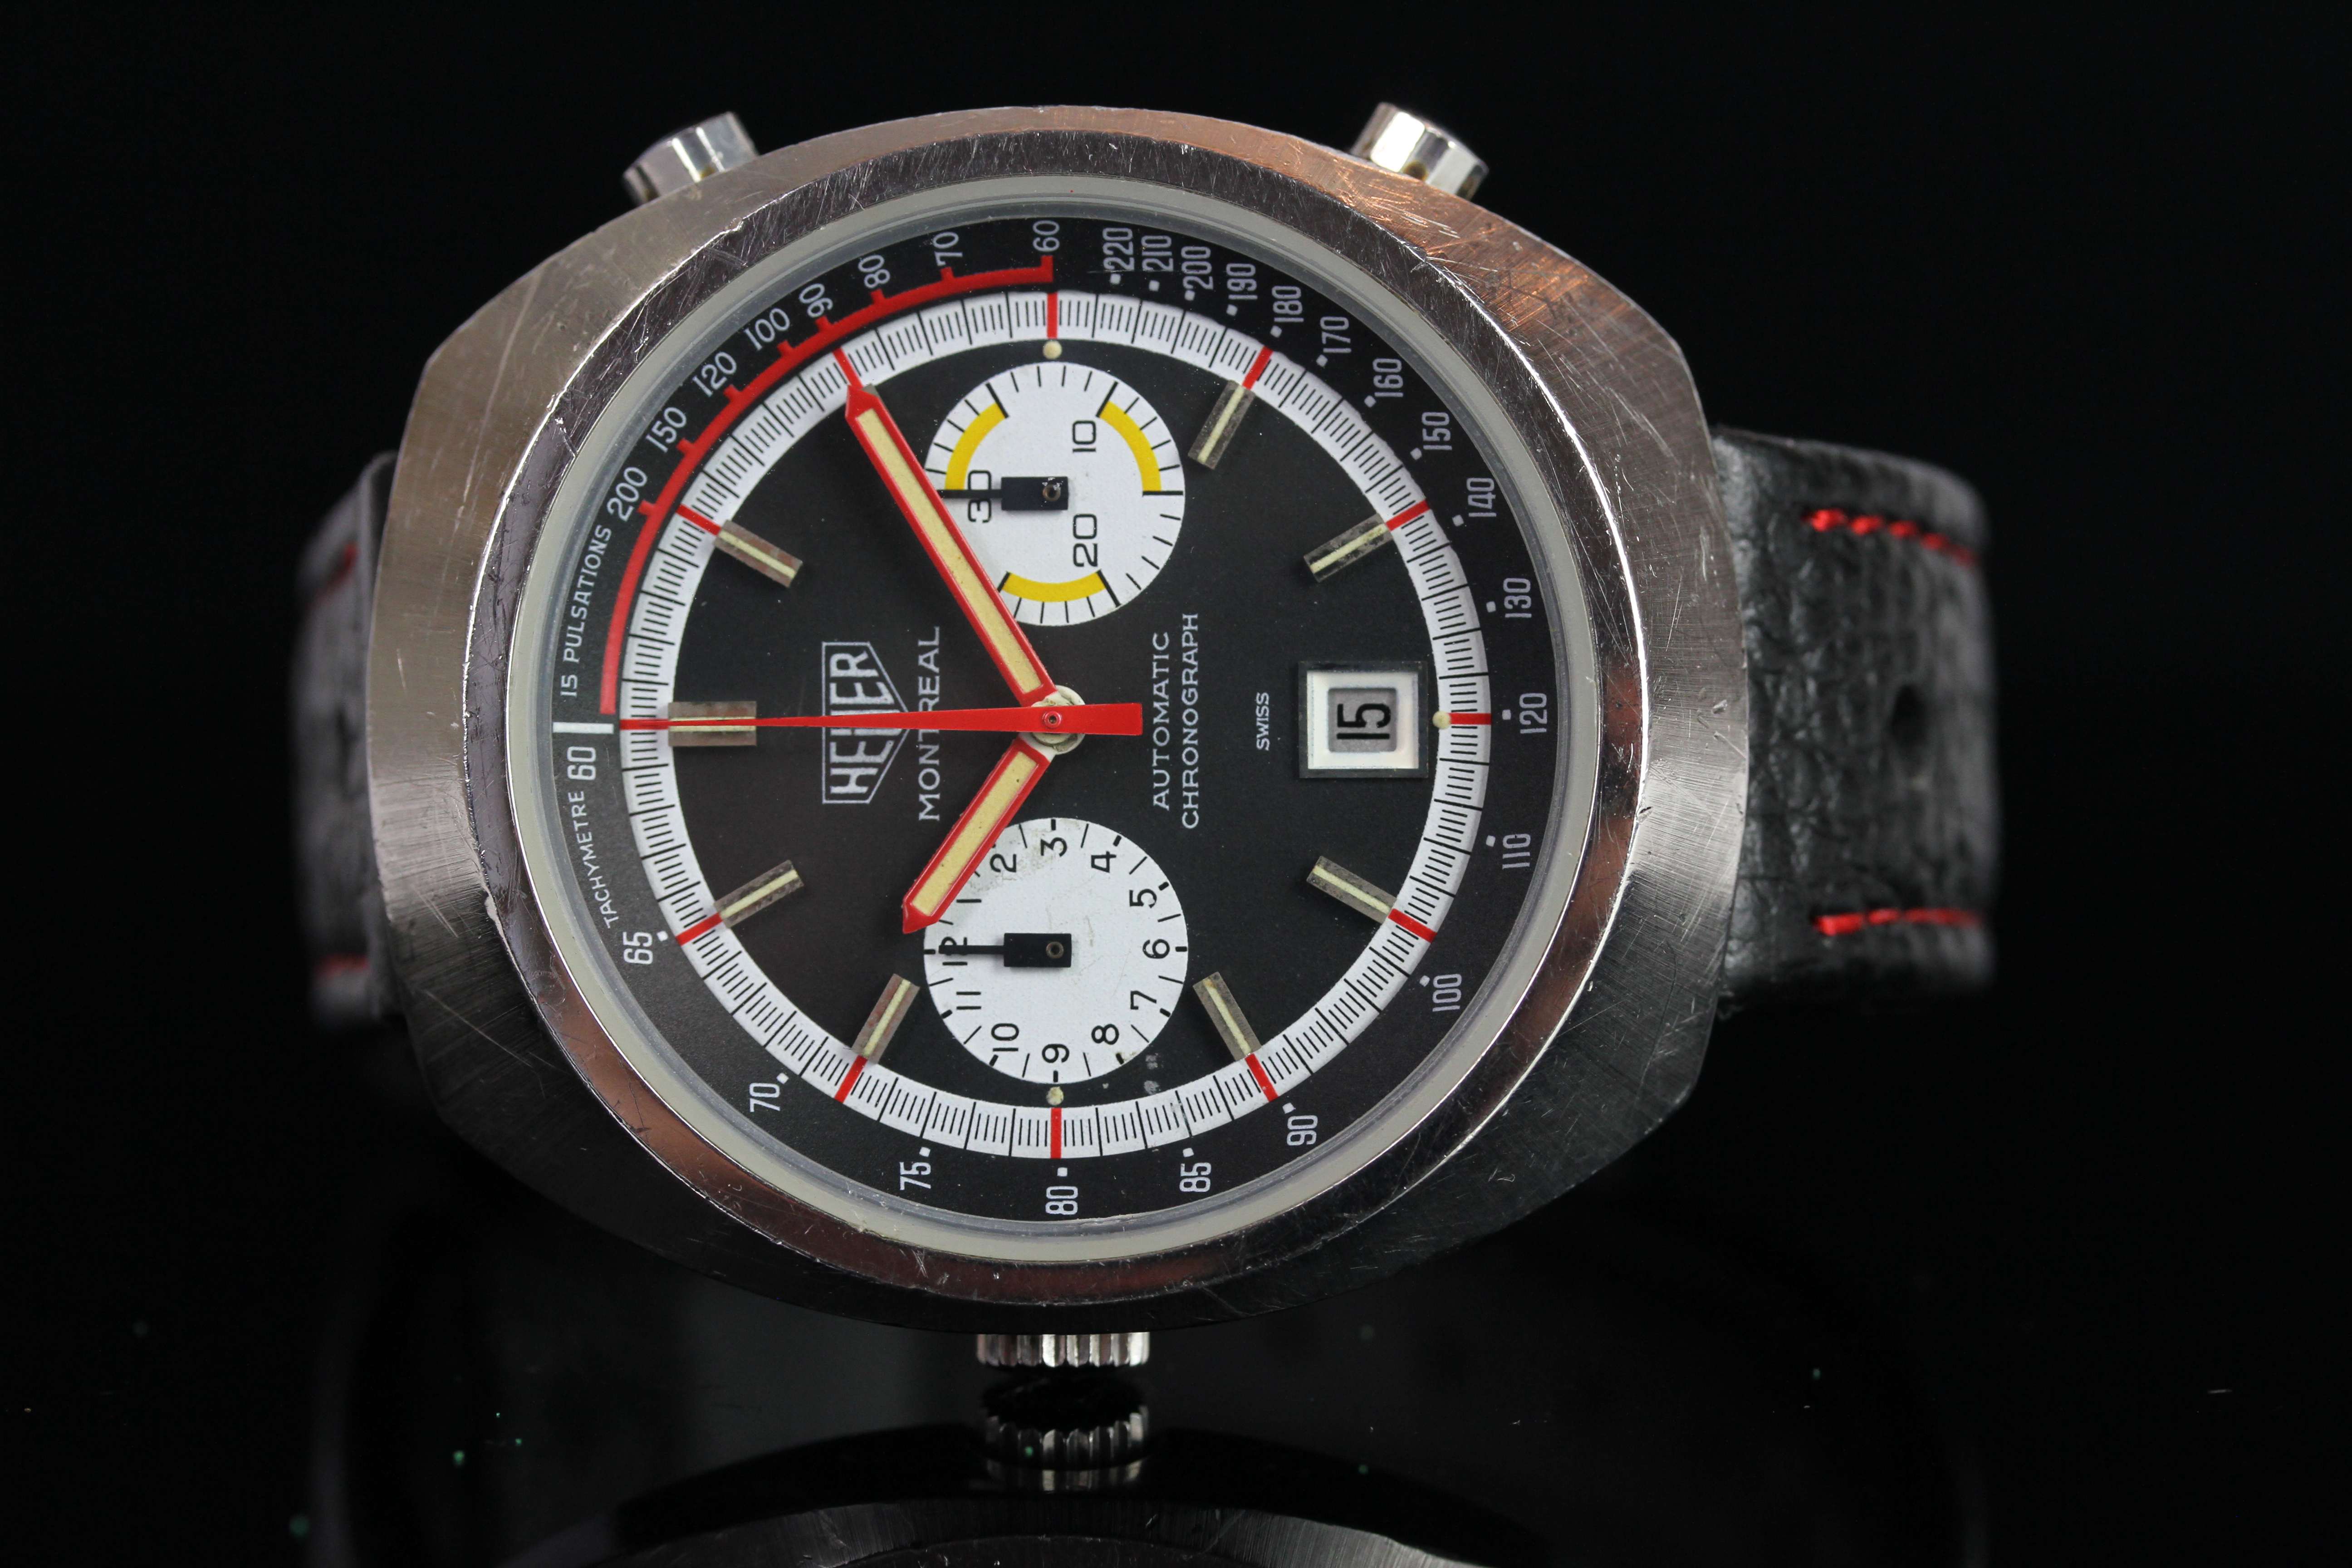 GENTLEMANS TAG HEUER CHRONOGRAPH MONTREAL,round, black dial with illuminated hands,red illuminated